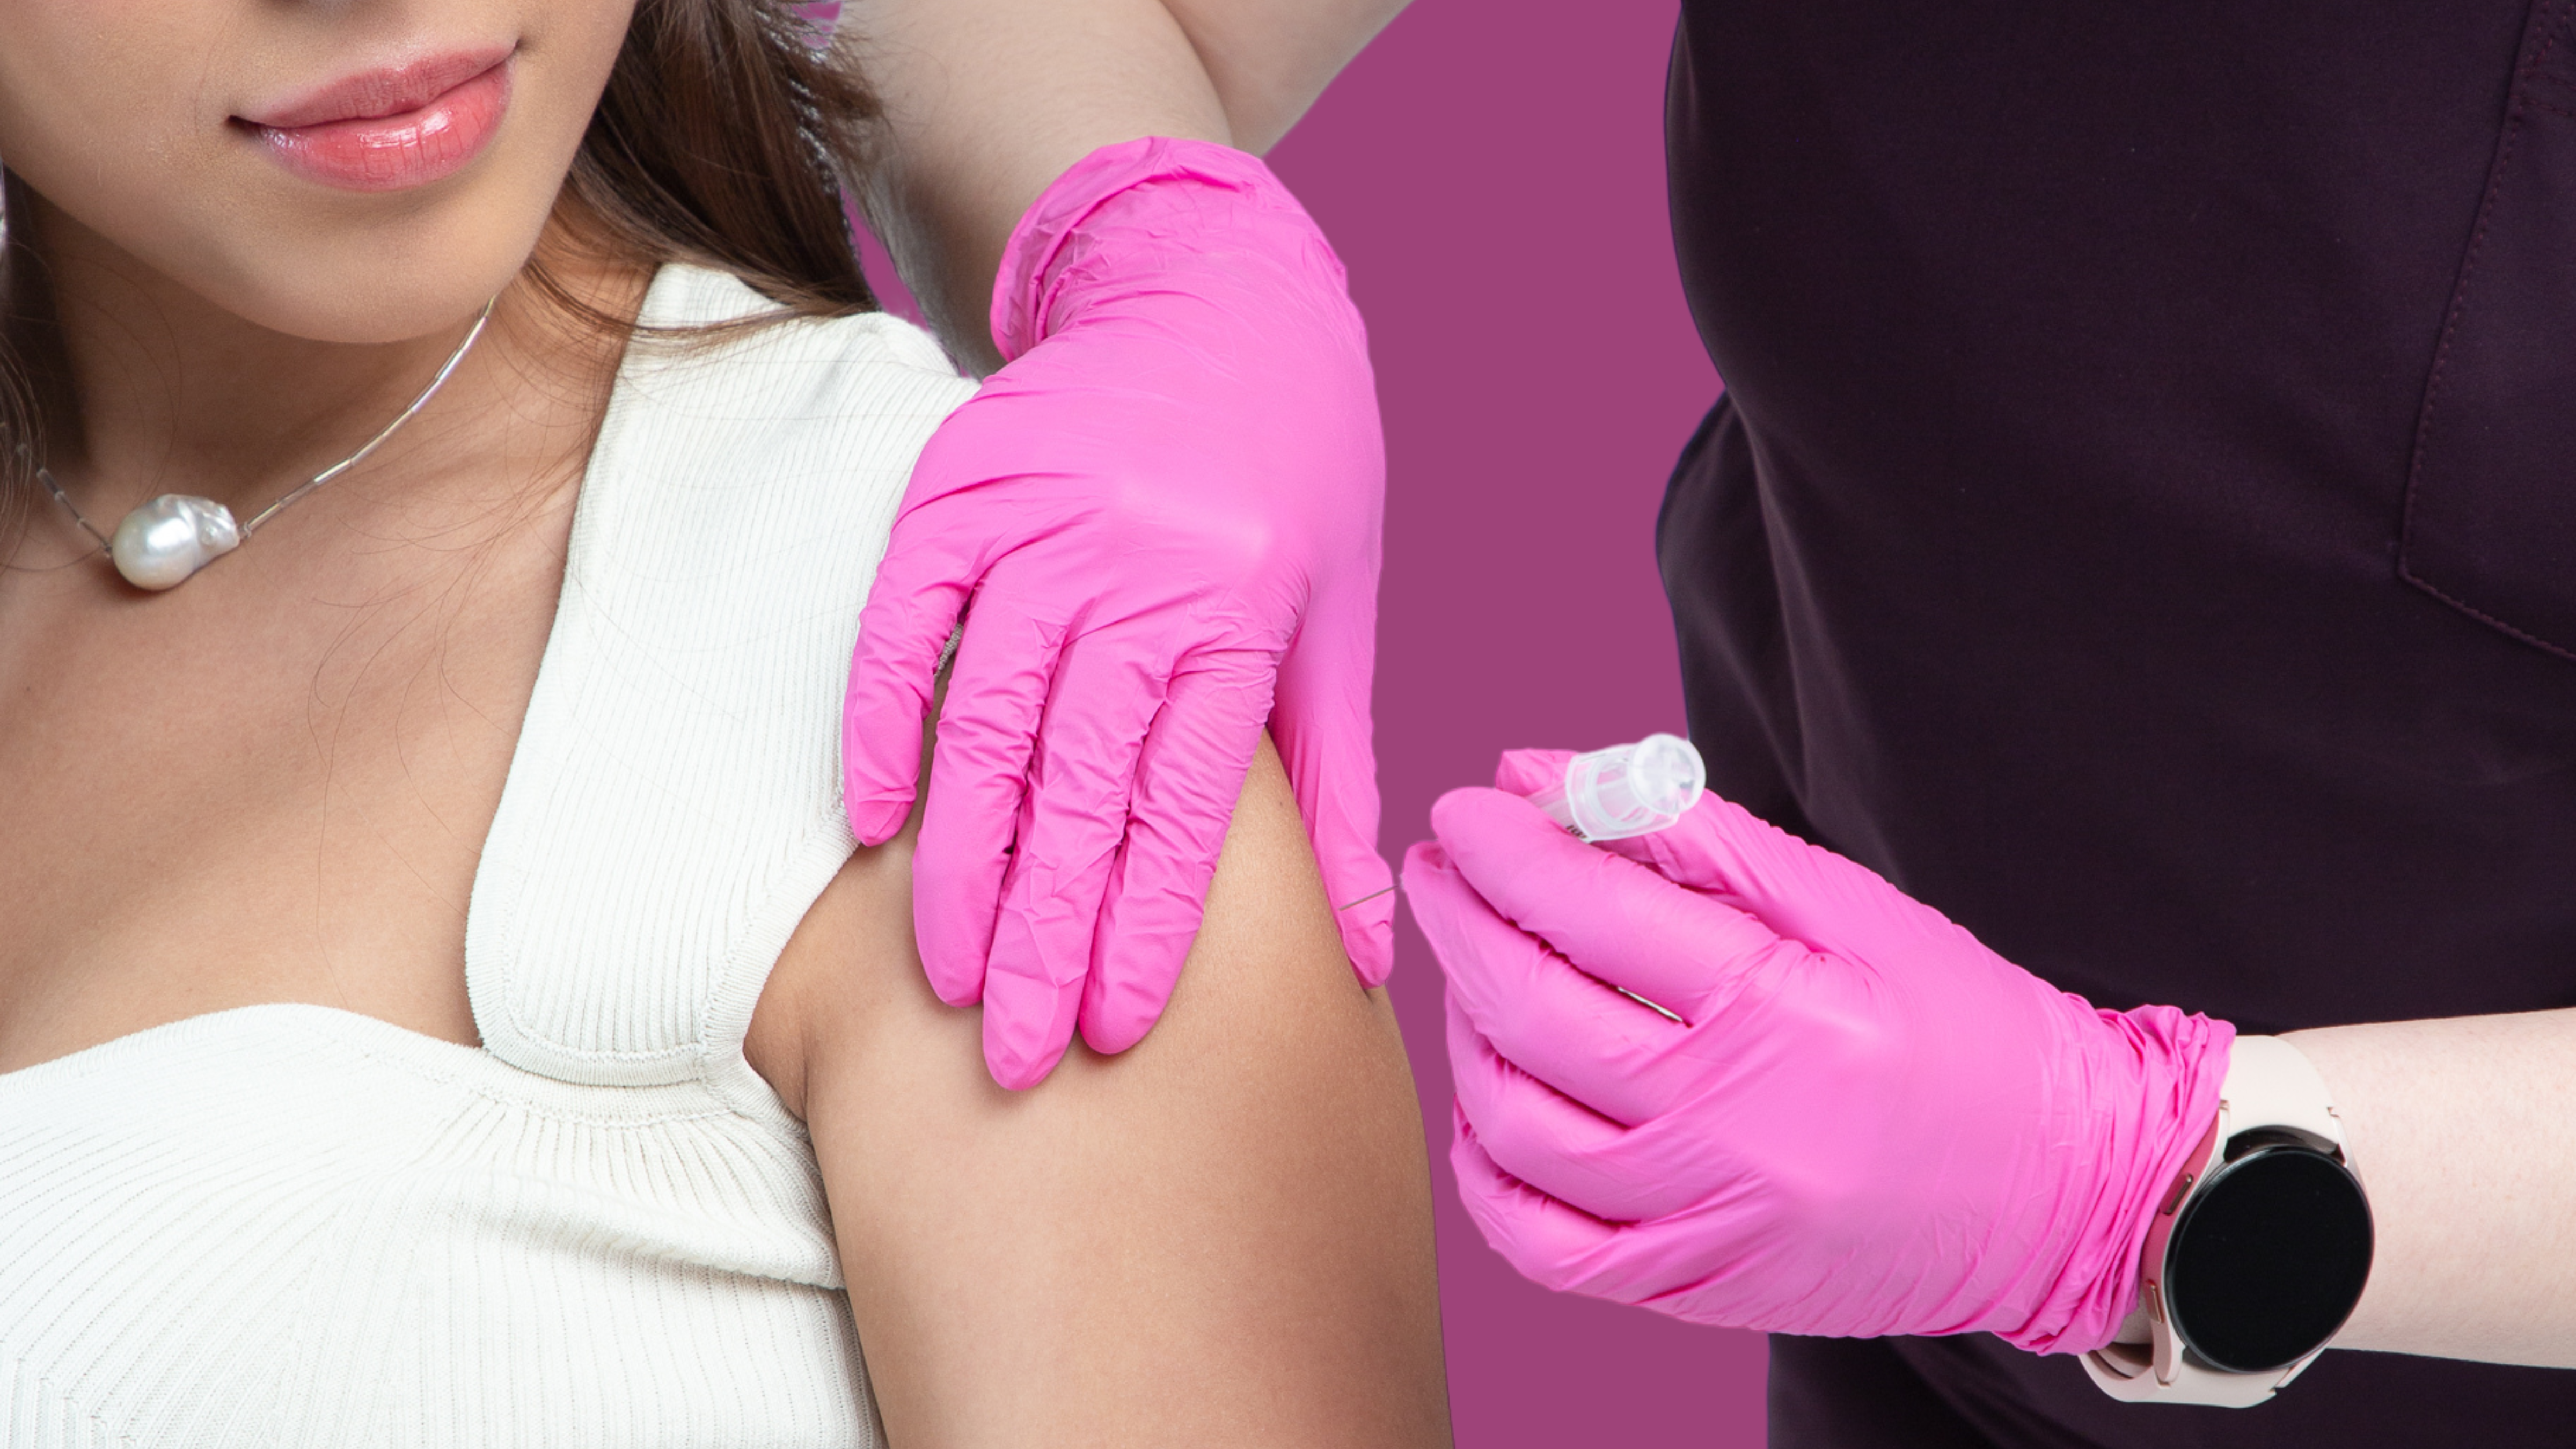 A guide to Kindred’s HPV vaccines in the Philippines